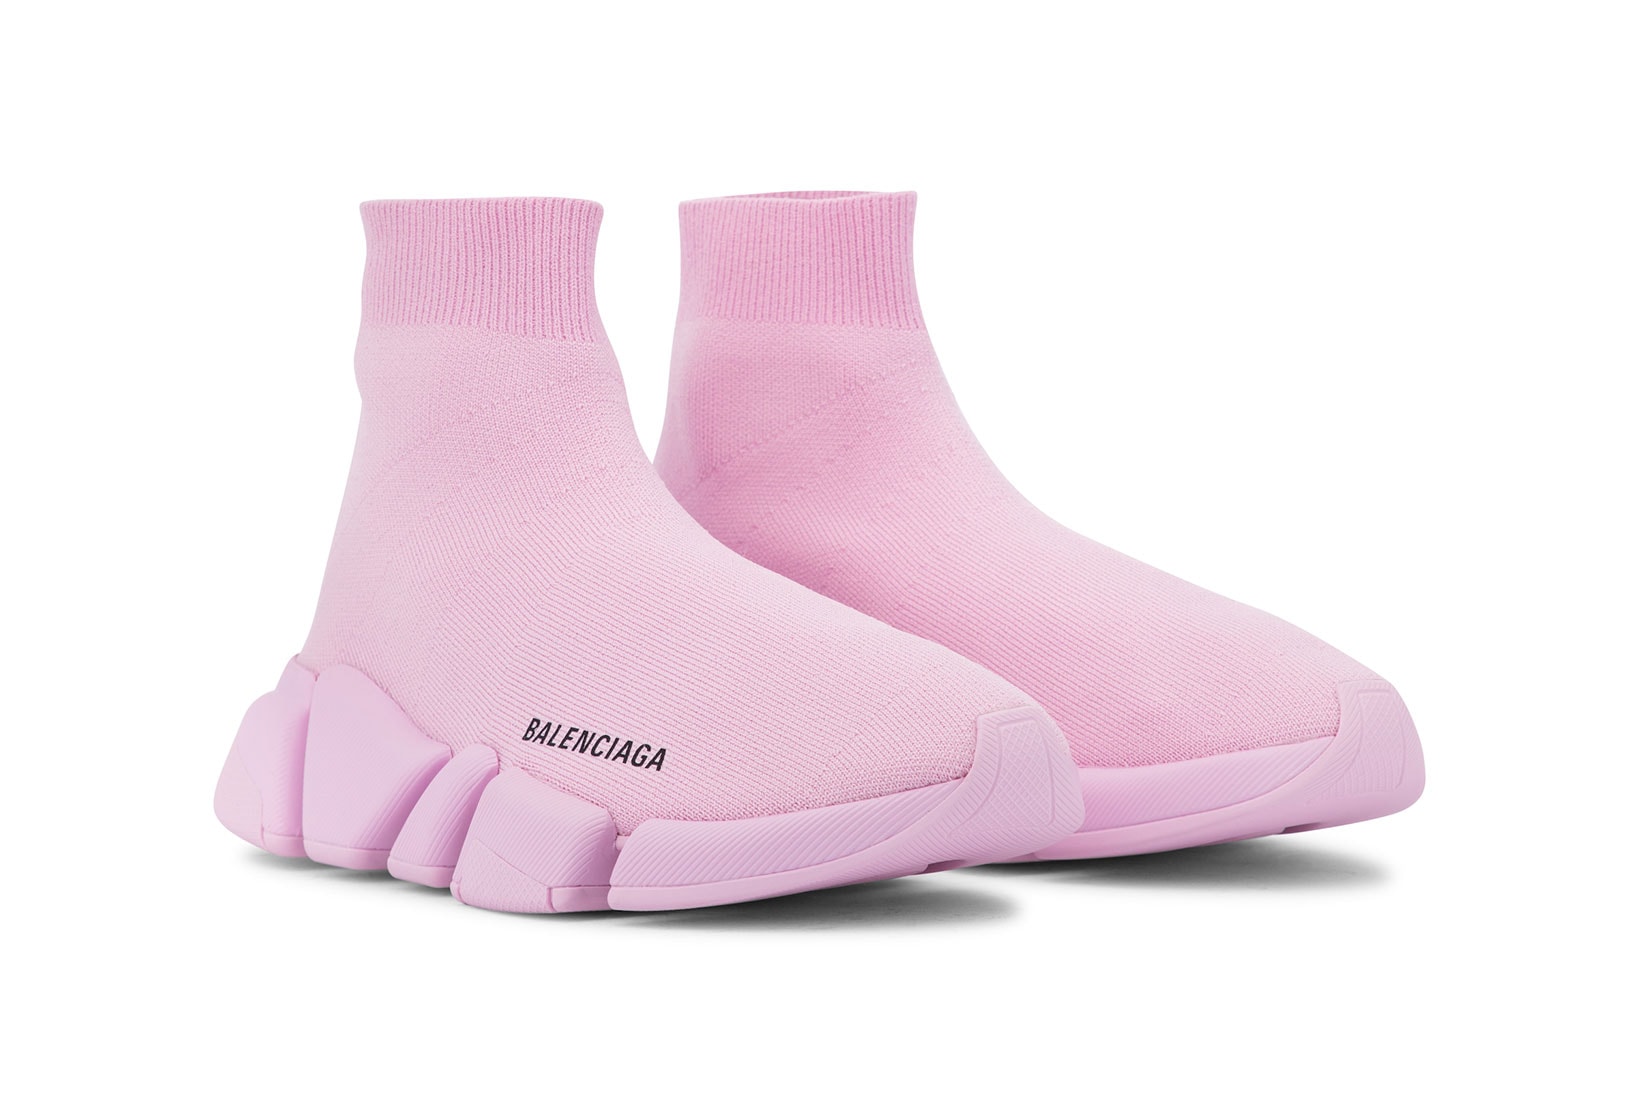 balenciaga speed 2 0 sneakers light pink colorway shoes footwear designer shoes